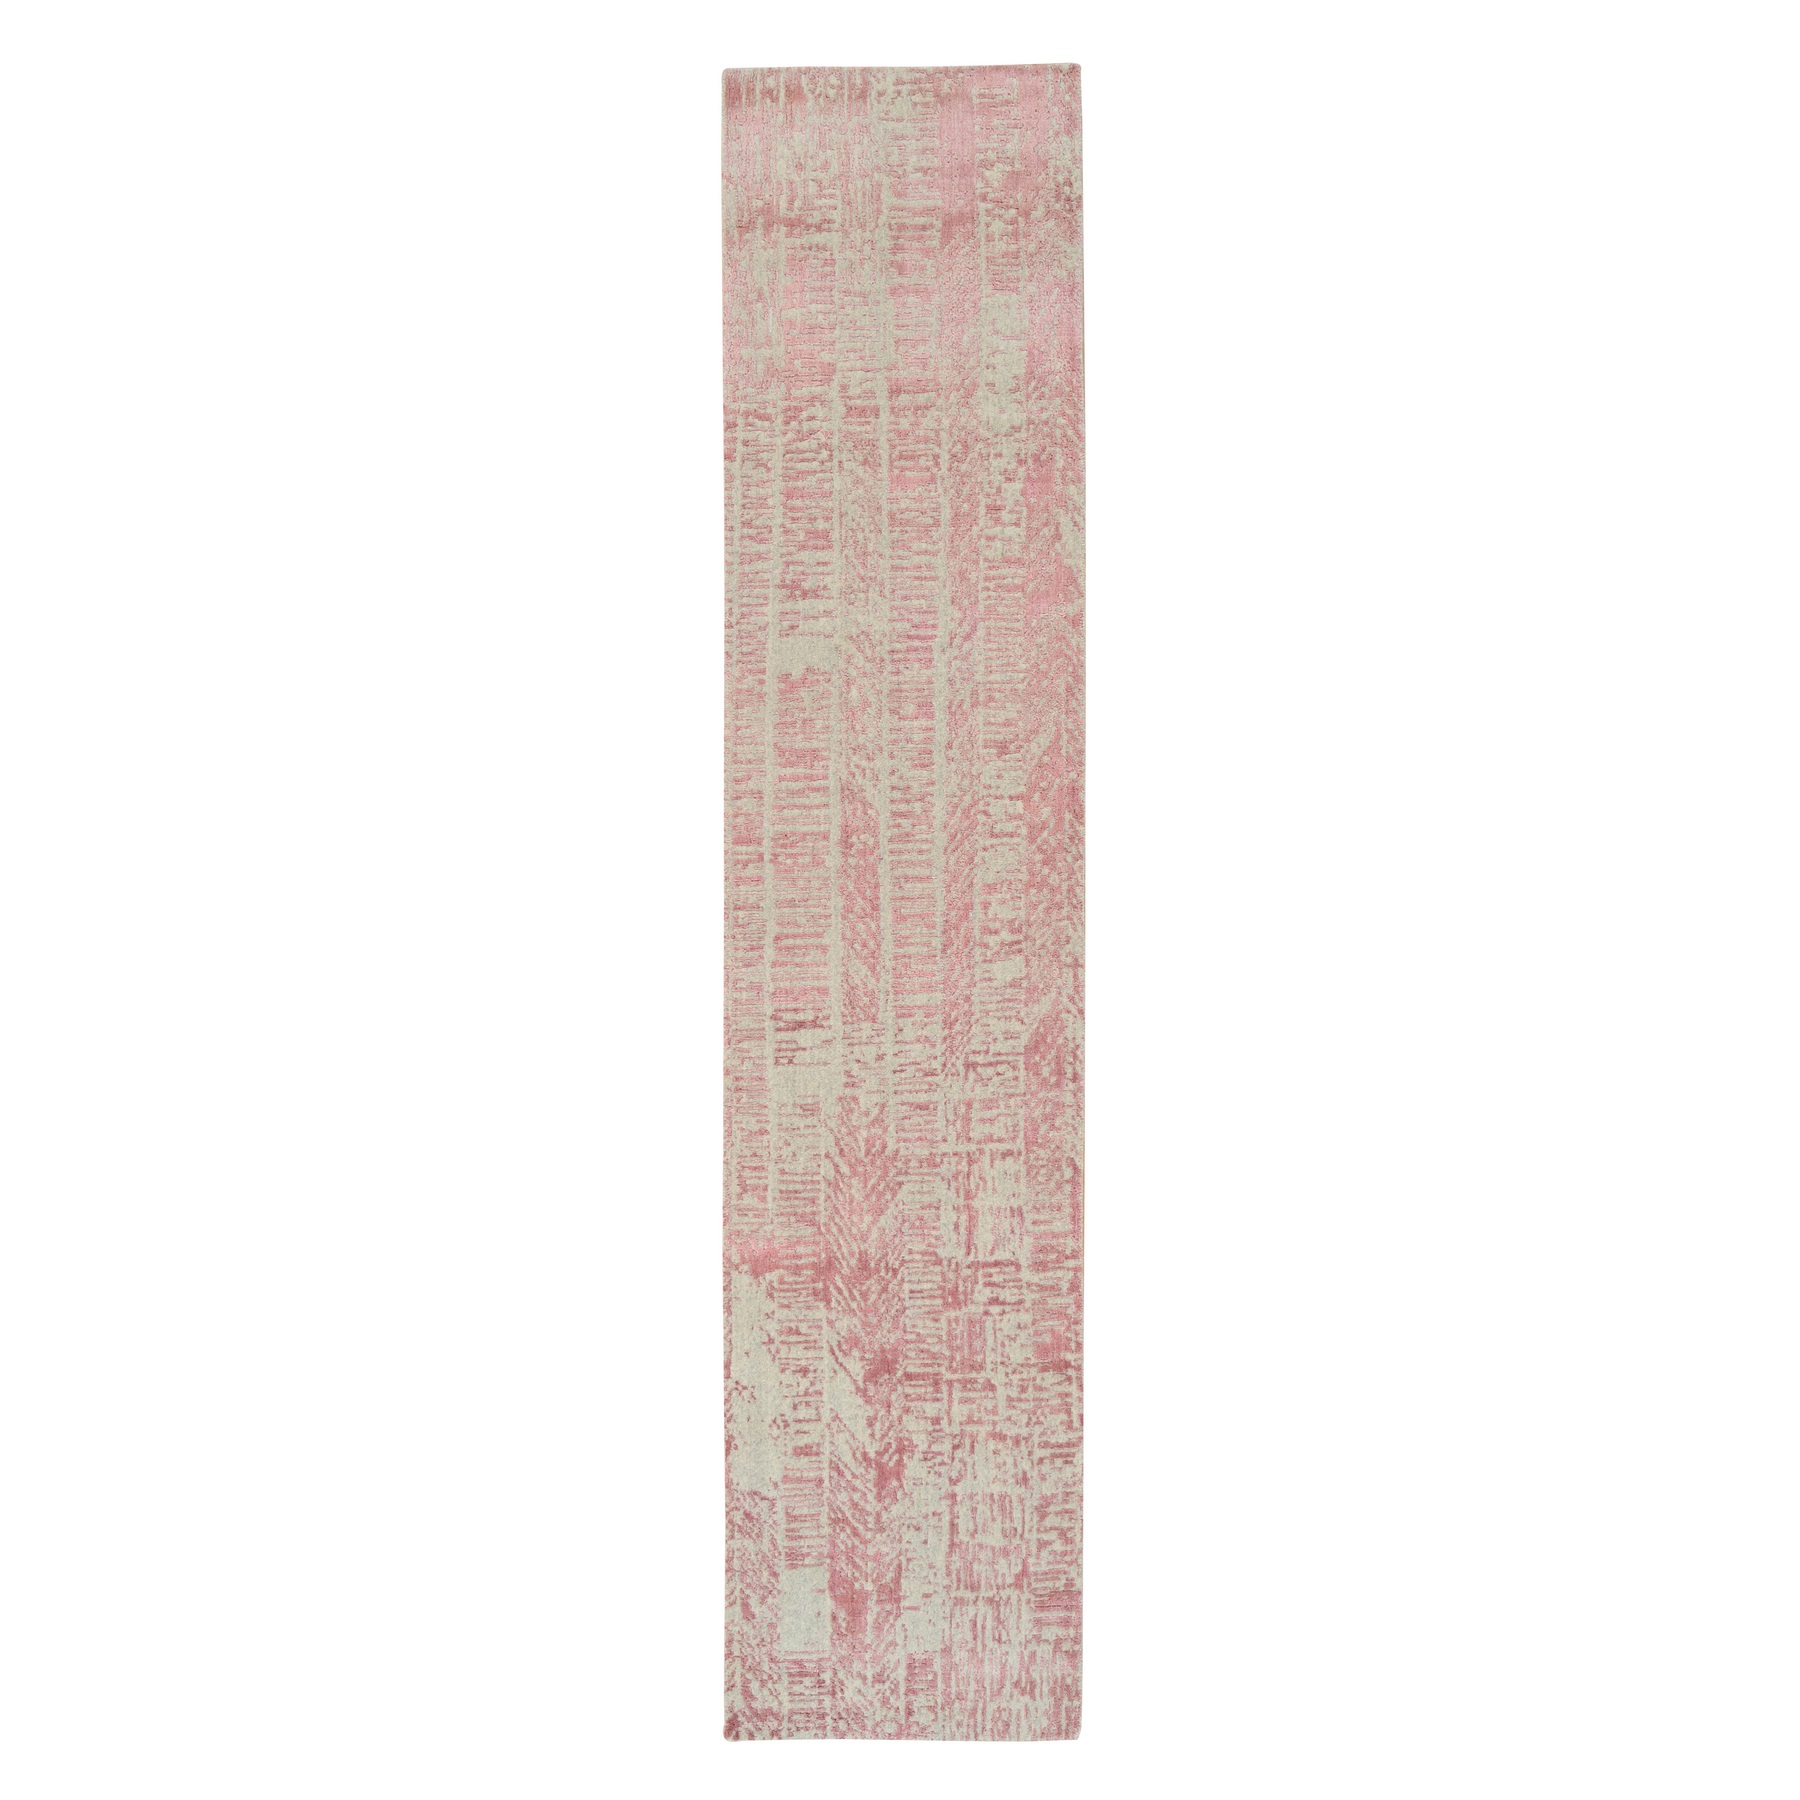 2'6"x12' Rose Pink, Jacquard Hand Loomed, All Over Design Wool and Art Silk, Runner Oriental Rug 